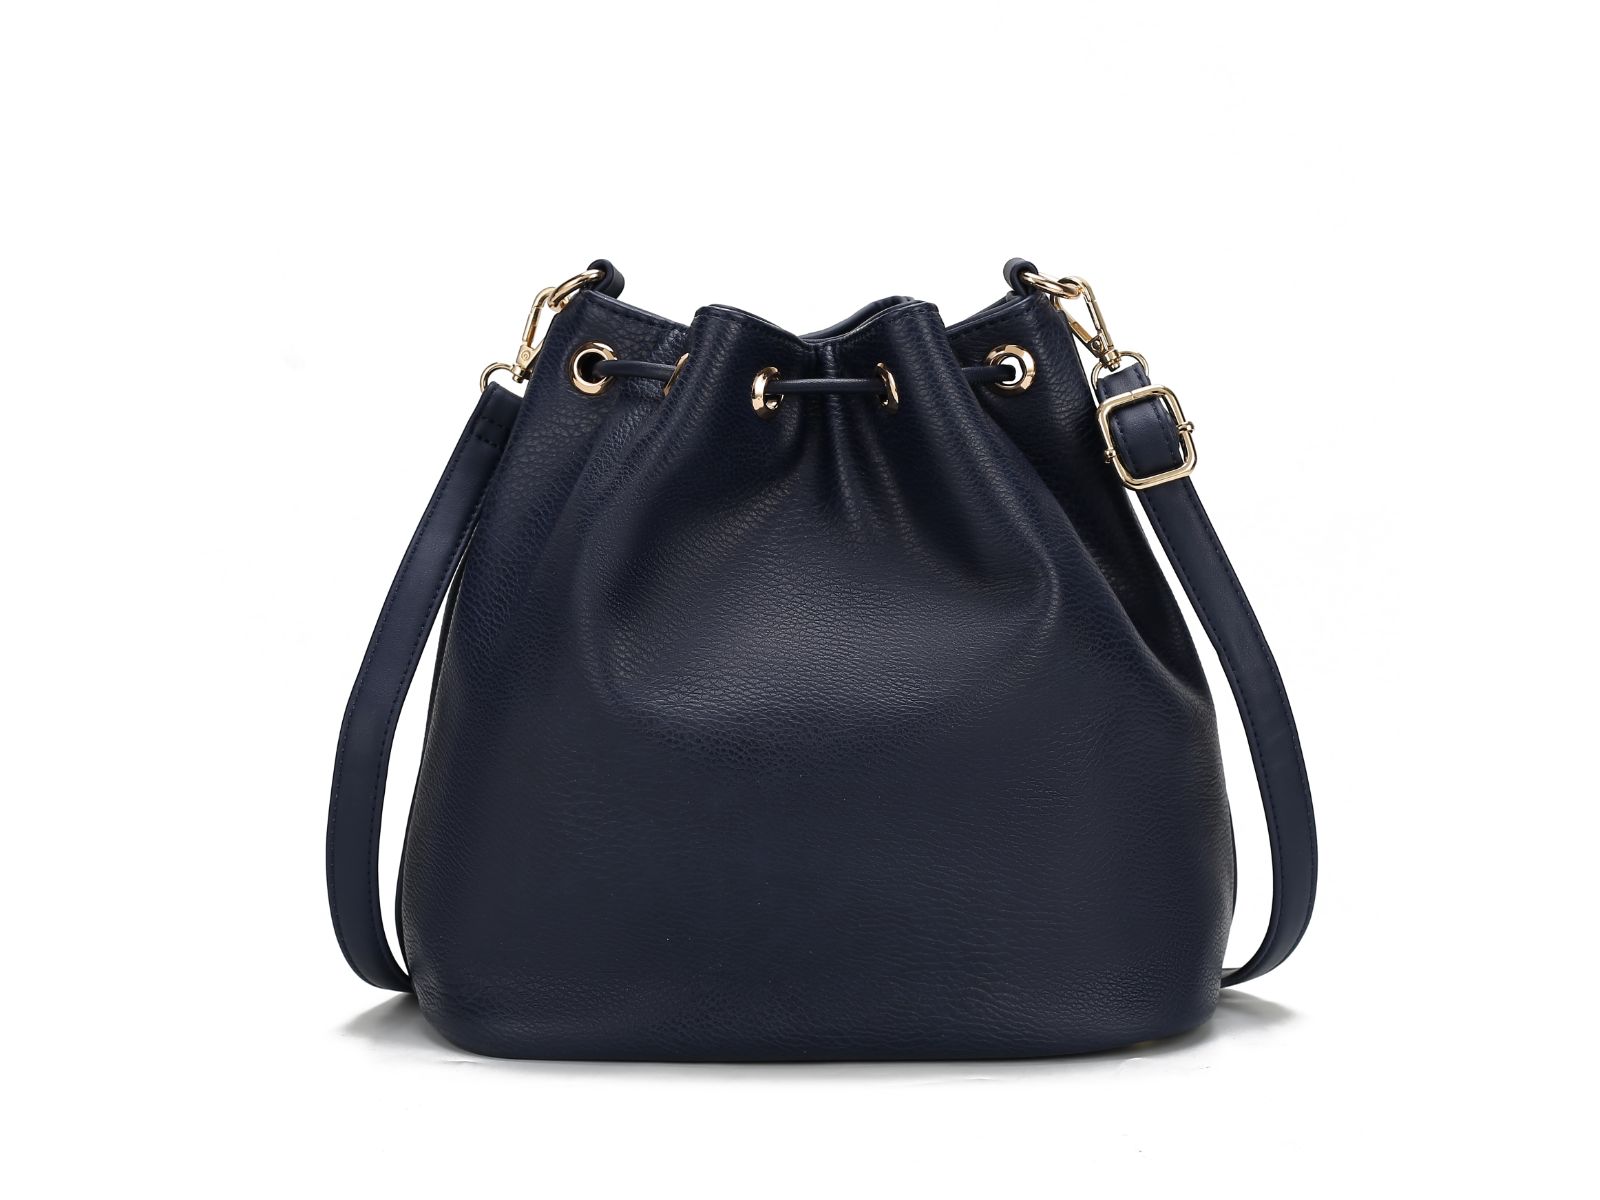 The Larissa Vegan Leather Women's Bucket Bag with Wallet by Pink Orpheus is a blue vegan leather bag with gold hardware. It features an adjustable strap for customizable comfort.